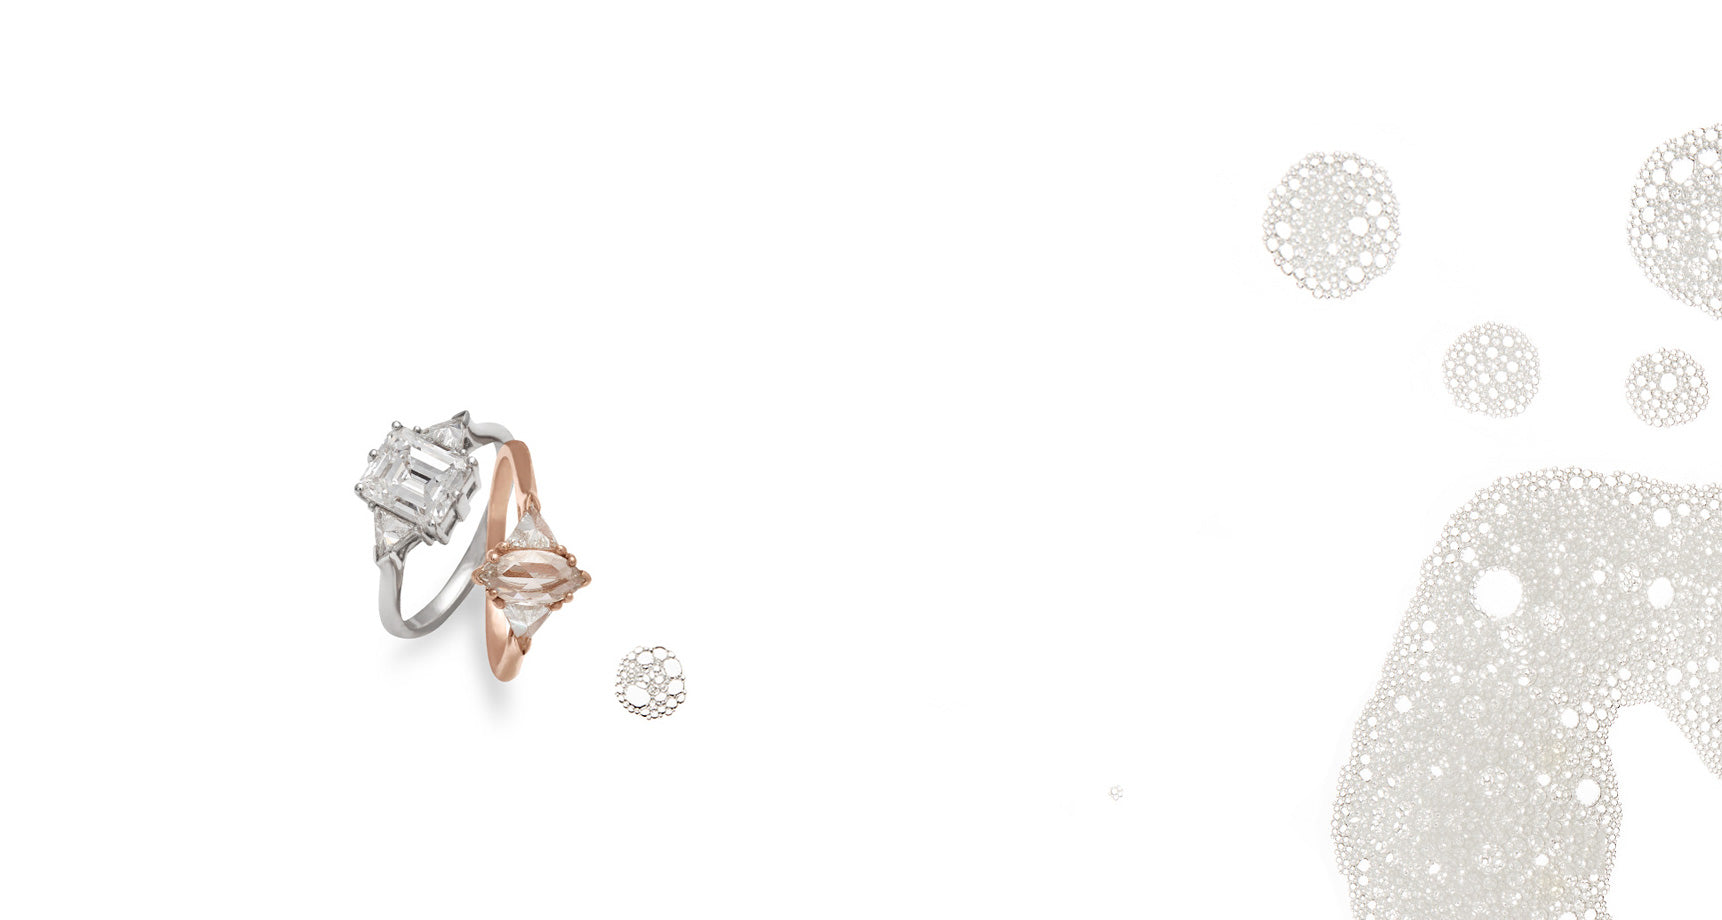 A background image of 2 Bea Three Stone Engagement Rings, one in white gold and white diamonds, the other in rose gold and champagne diamond center, surrounded by bubbles.